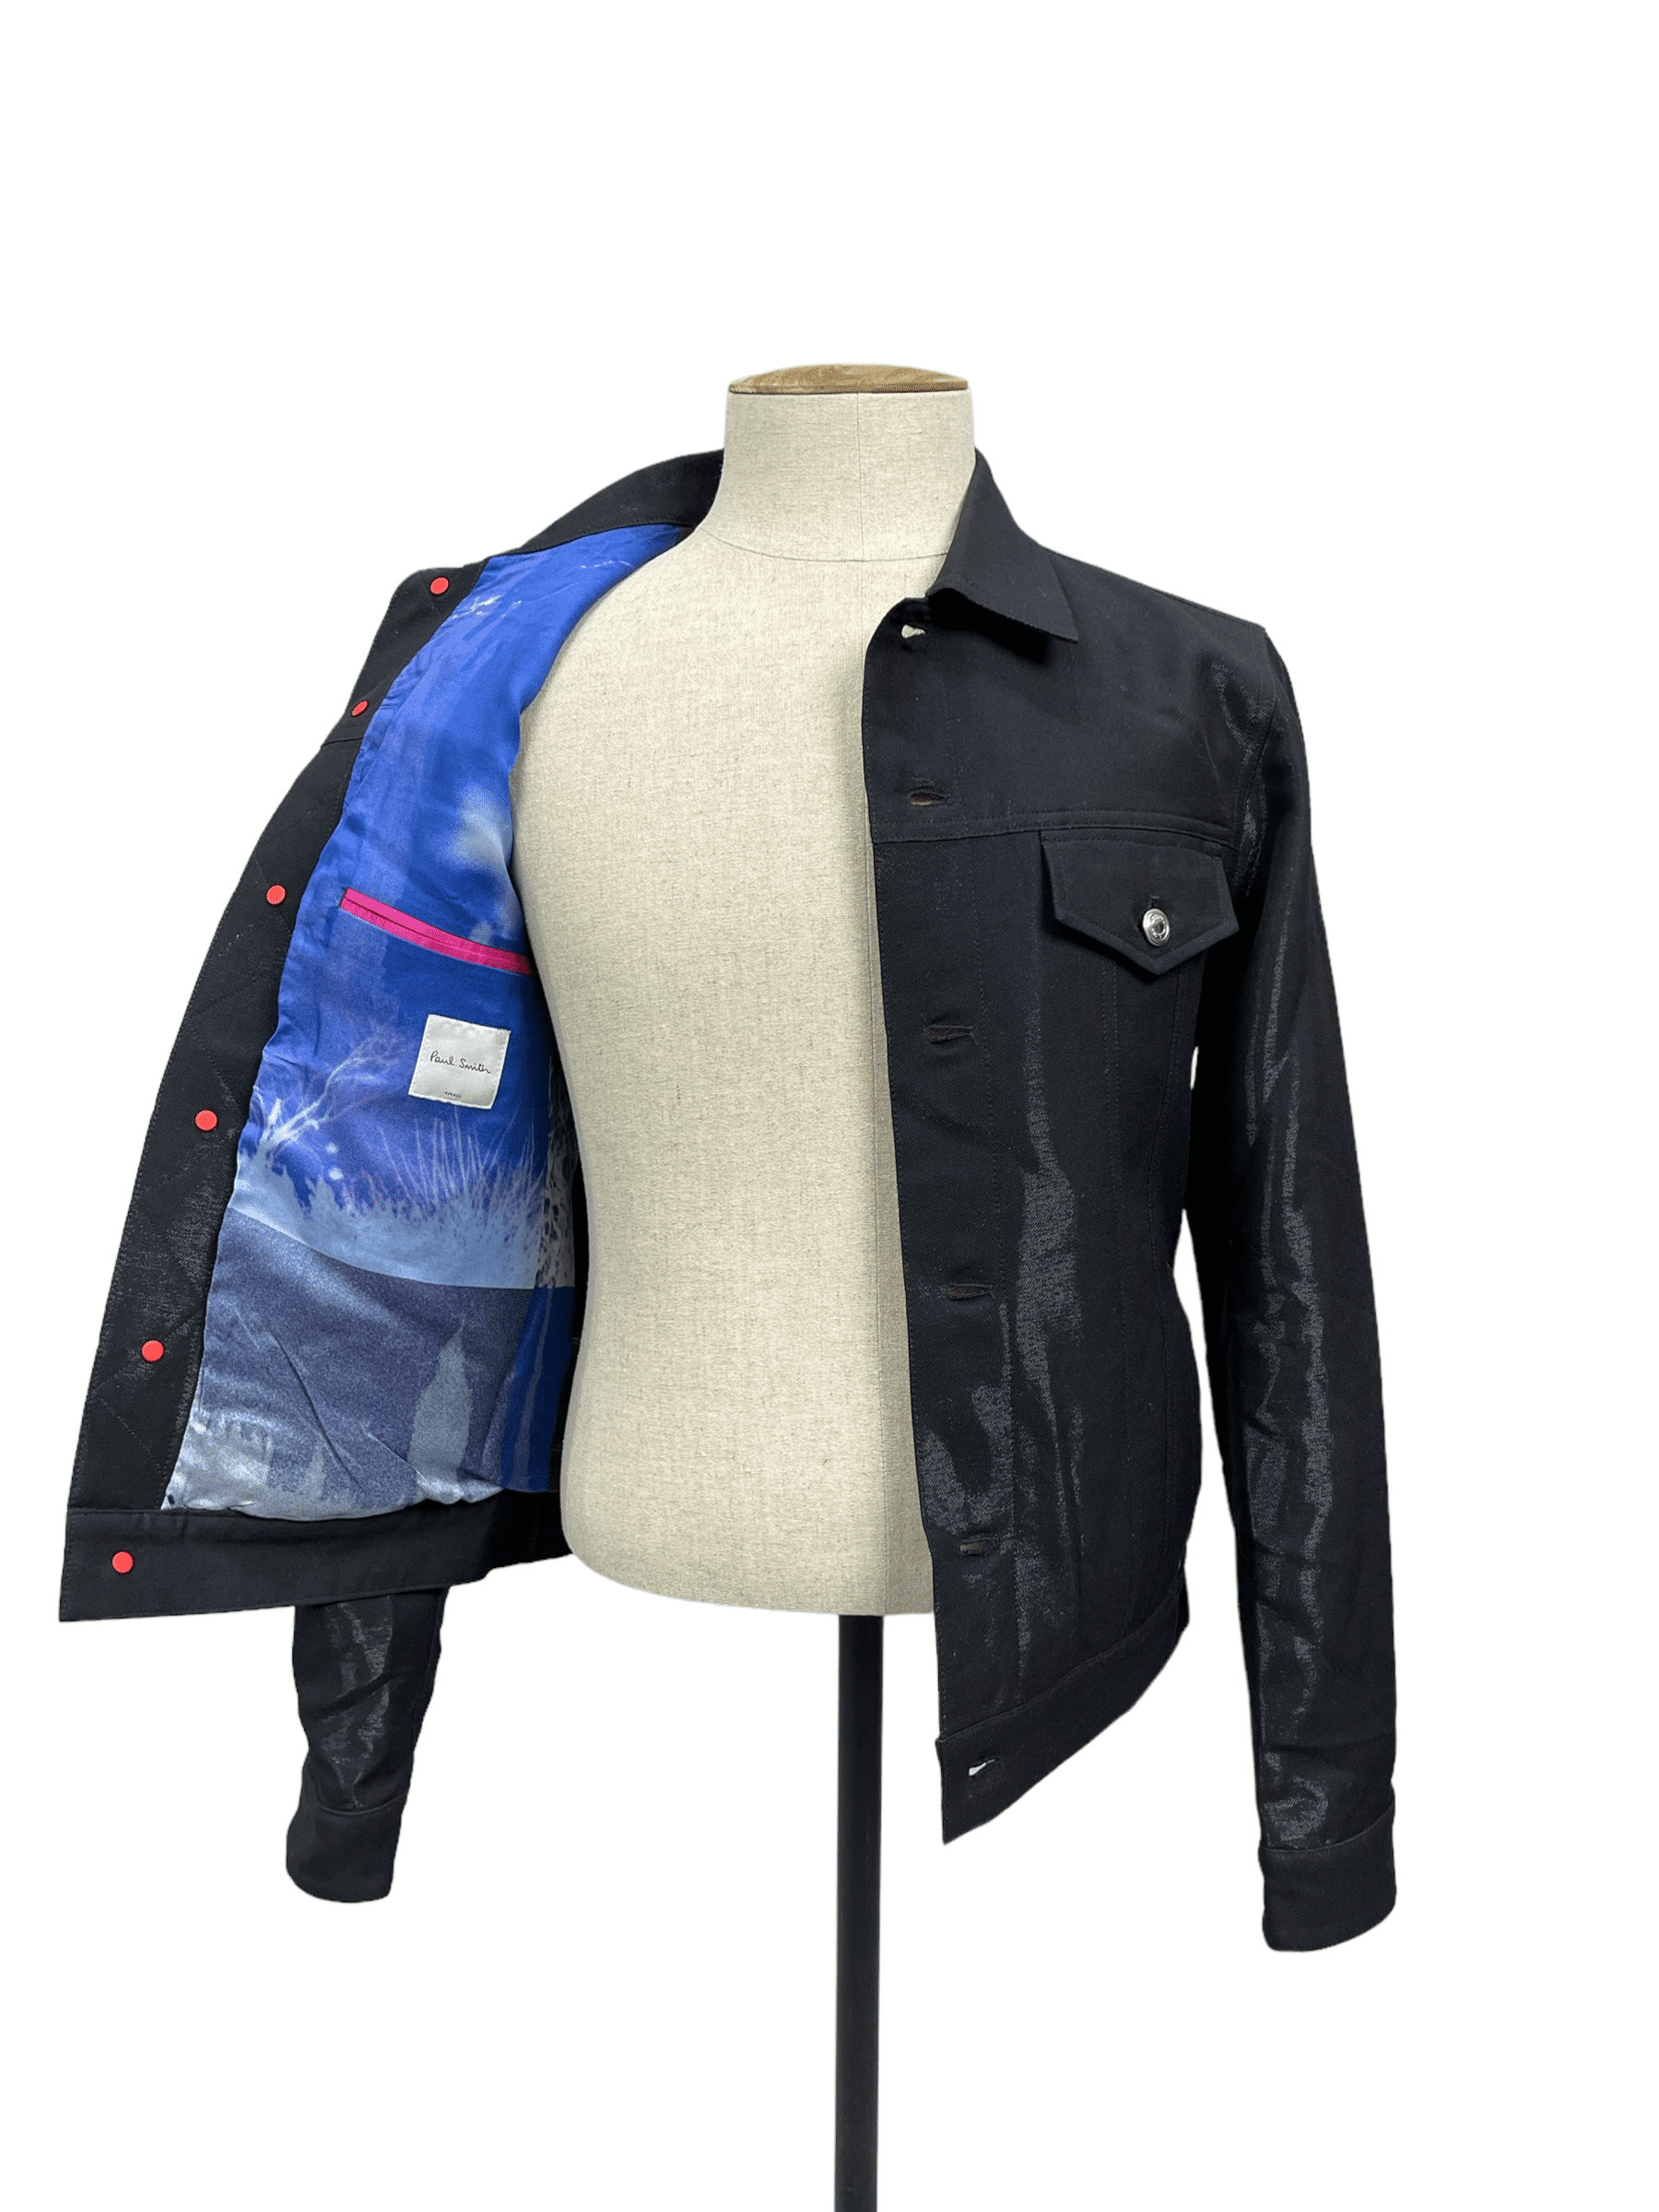 Paul Smith Black Trucker Jacket with Patterned Inner Lining  - Genuine Design Luxury Consignment for Men. New & Pre-Owned Clothing, Shoes, & Accessories. Calgary, Canada